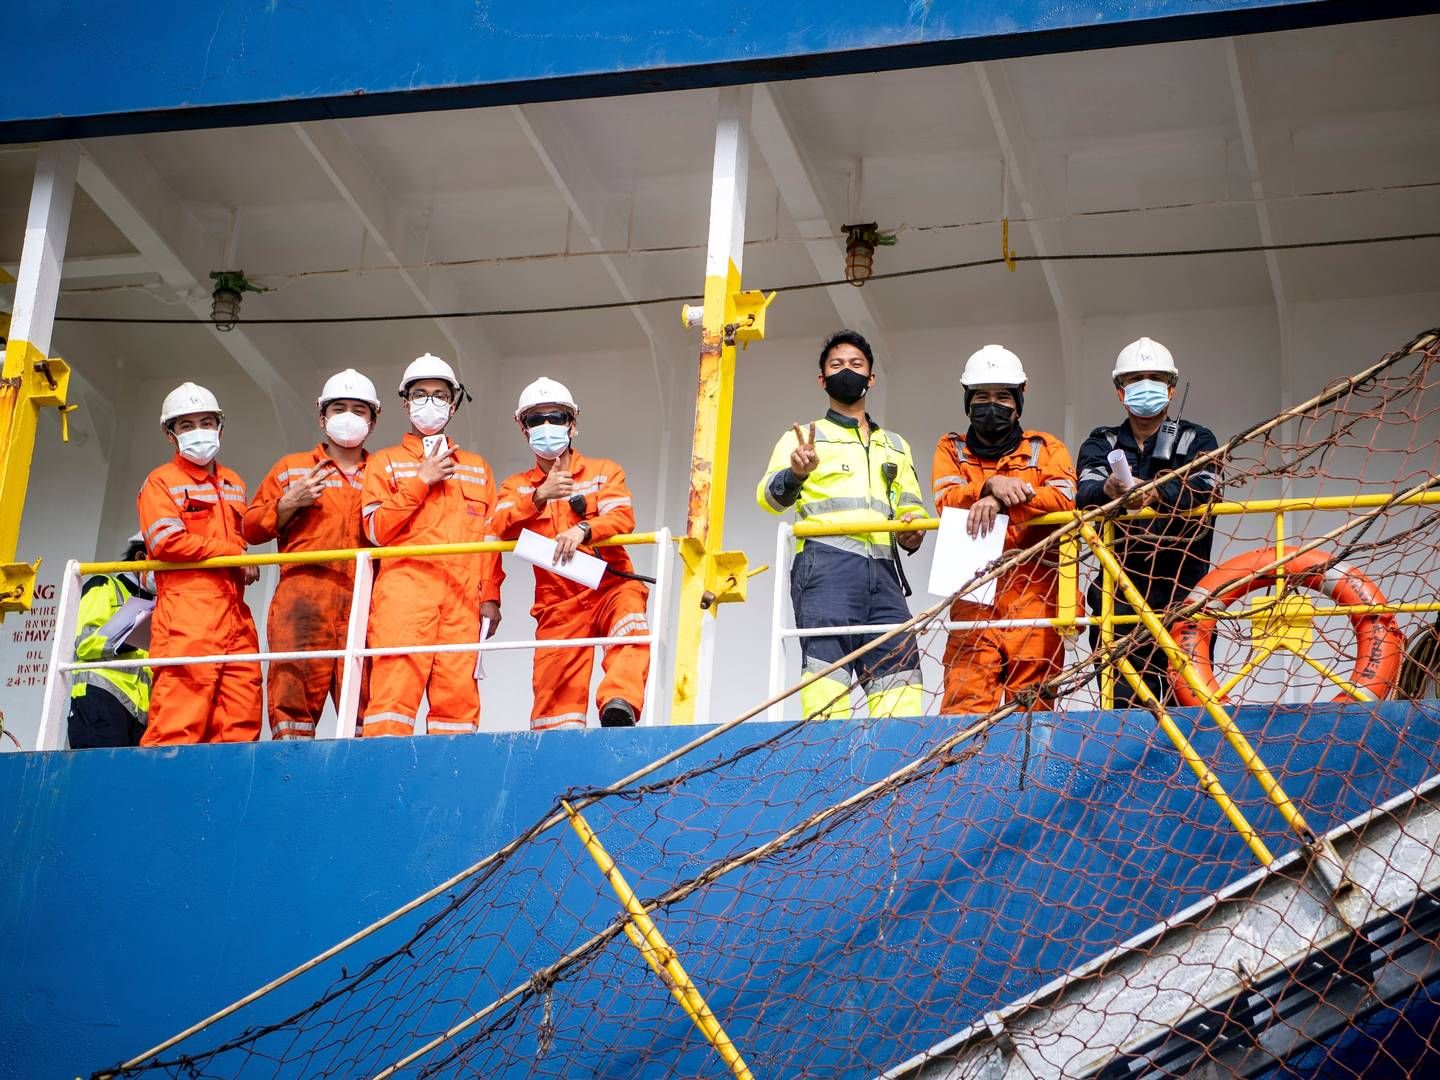 Many seafarers were caught up in border control measures during the pandemic, unable to get home to families. | Foto: Sina Schuldt/AP/Ritzau Scanpix